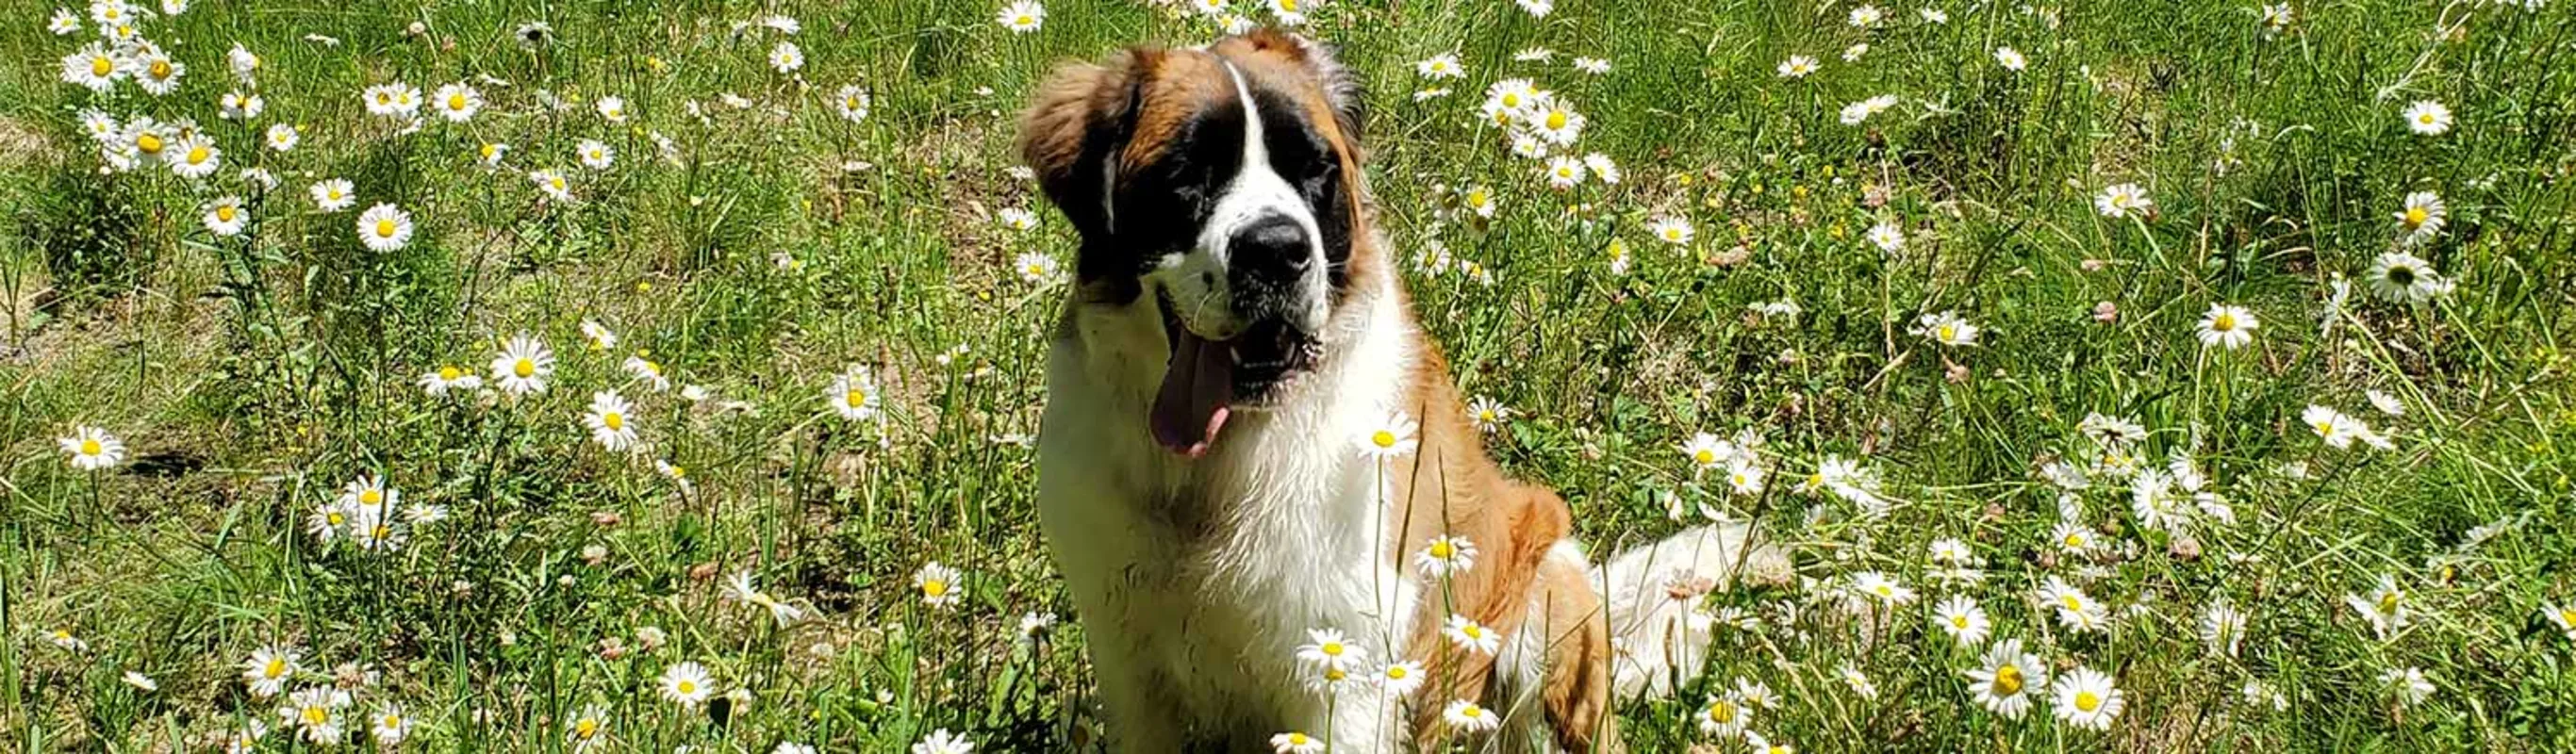 A large dog sitting in a grass field filled with flowers